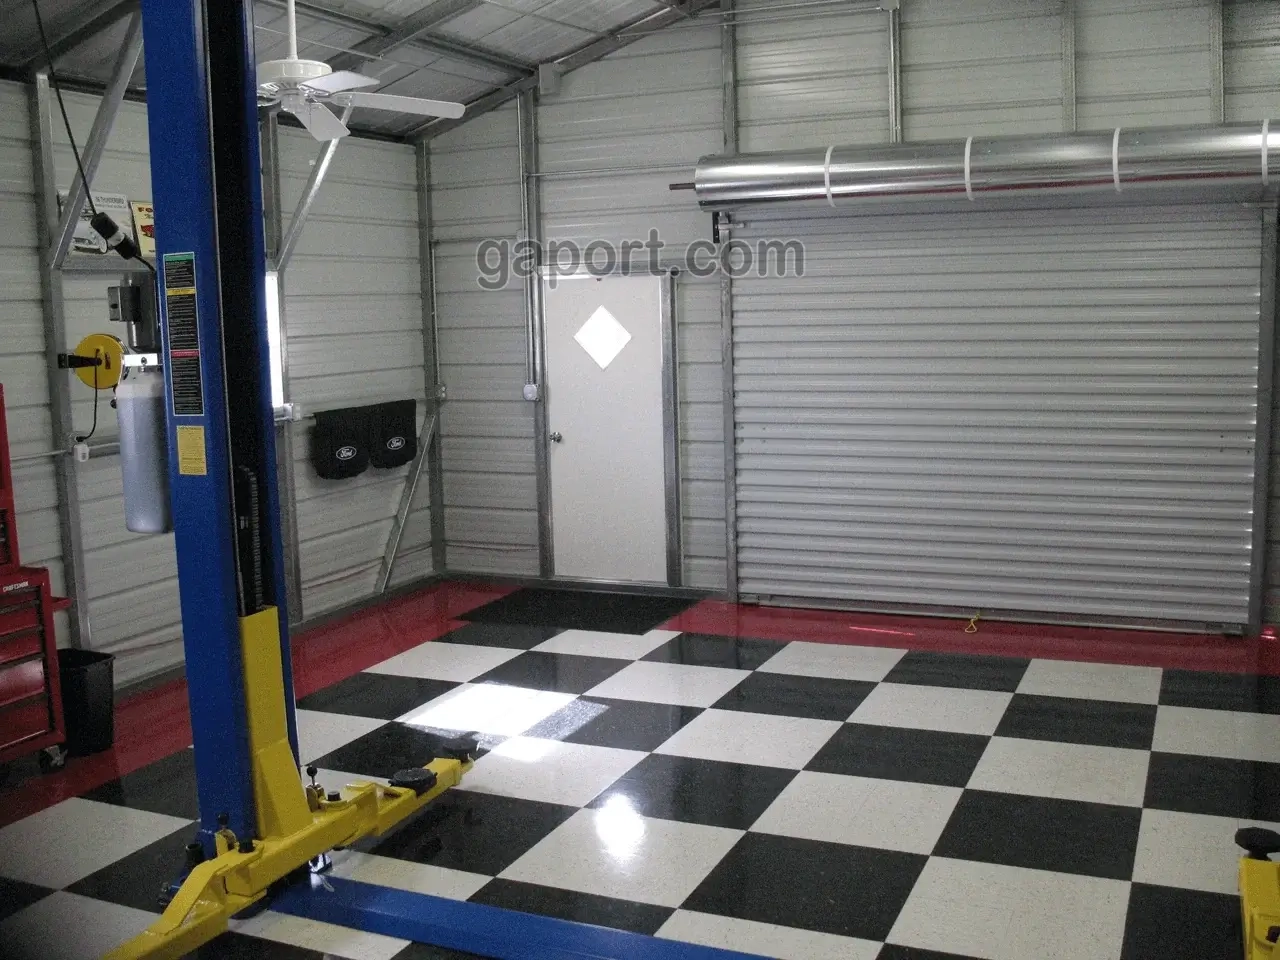 This image shows the interior of the 20x25x9 metal garage.